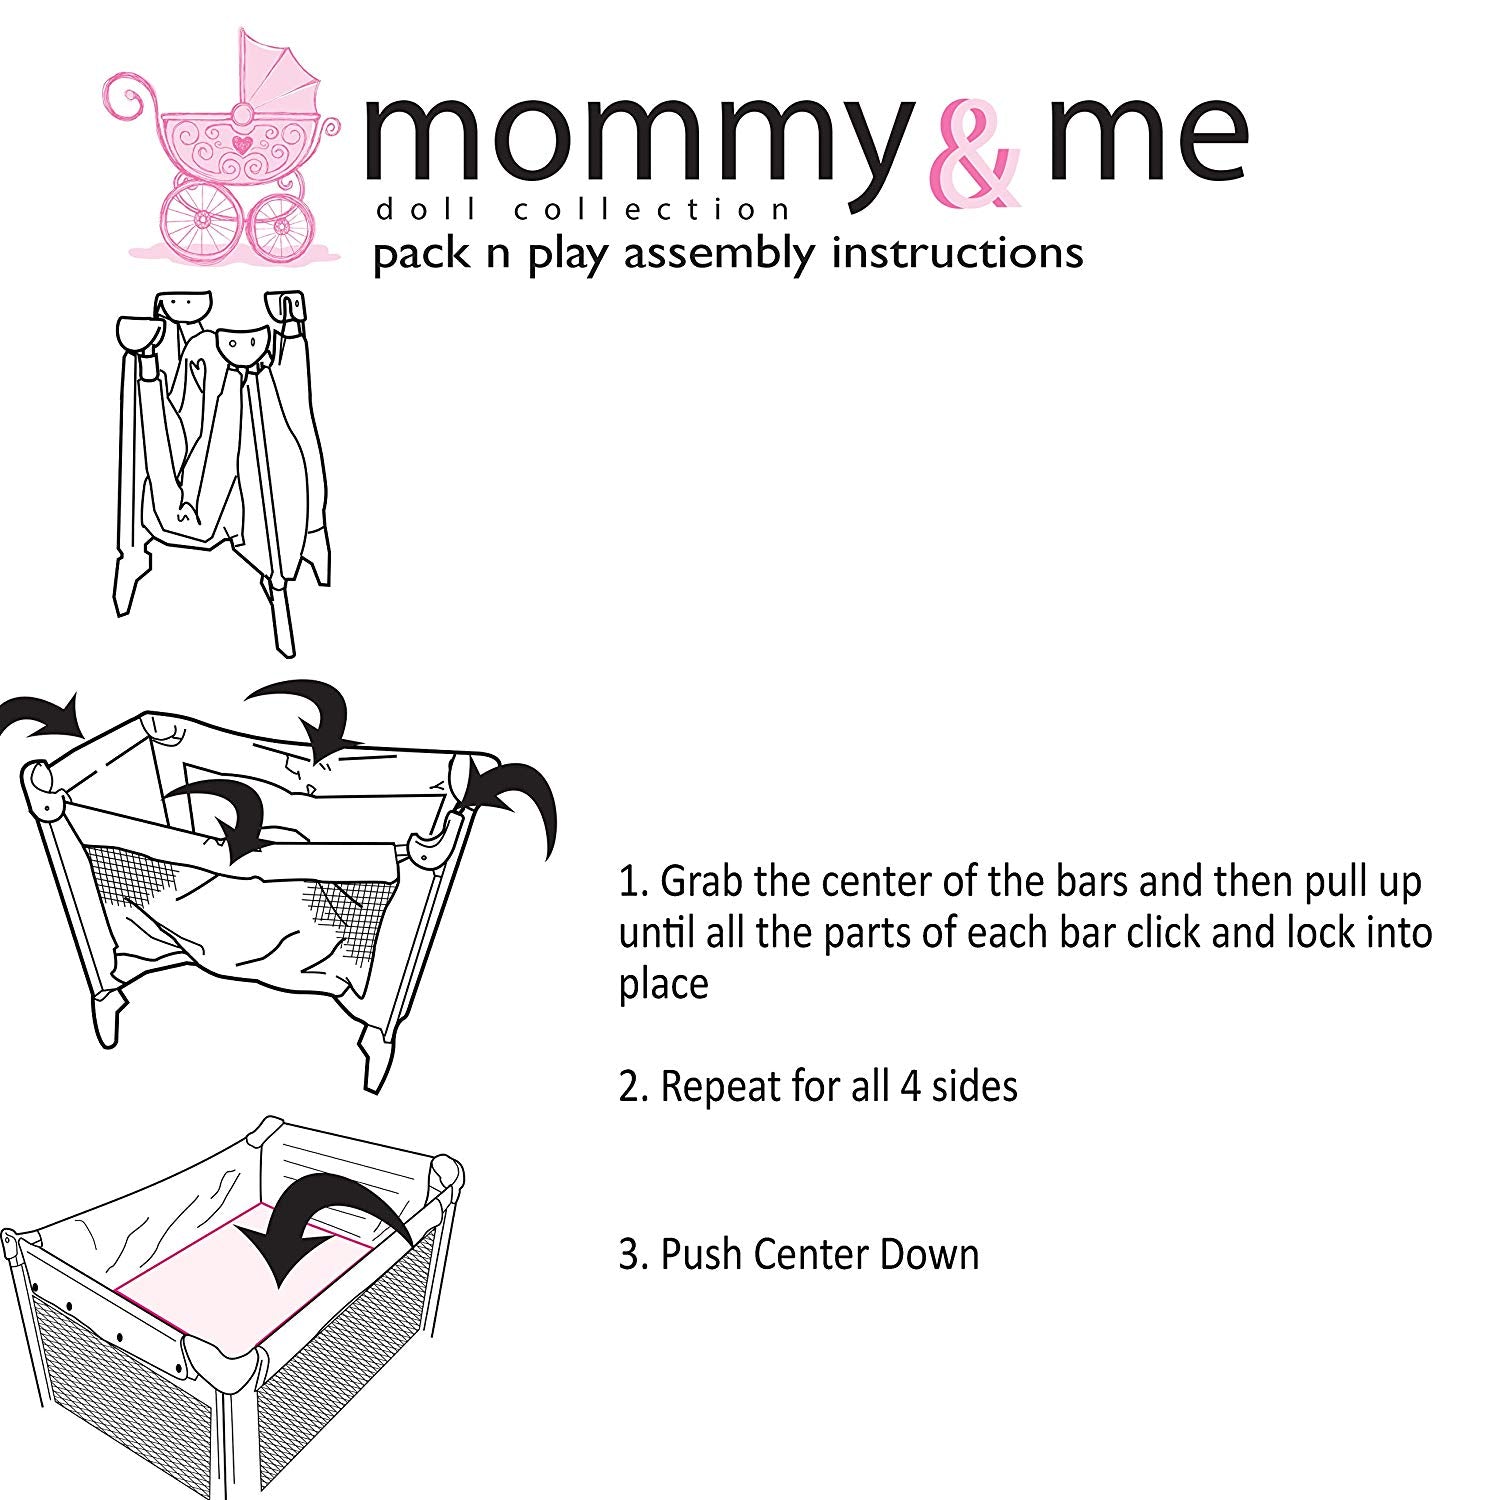 mommy & me 3 in 1 doll playset